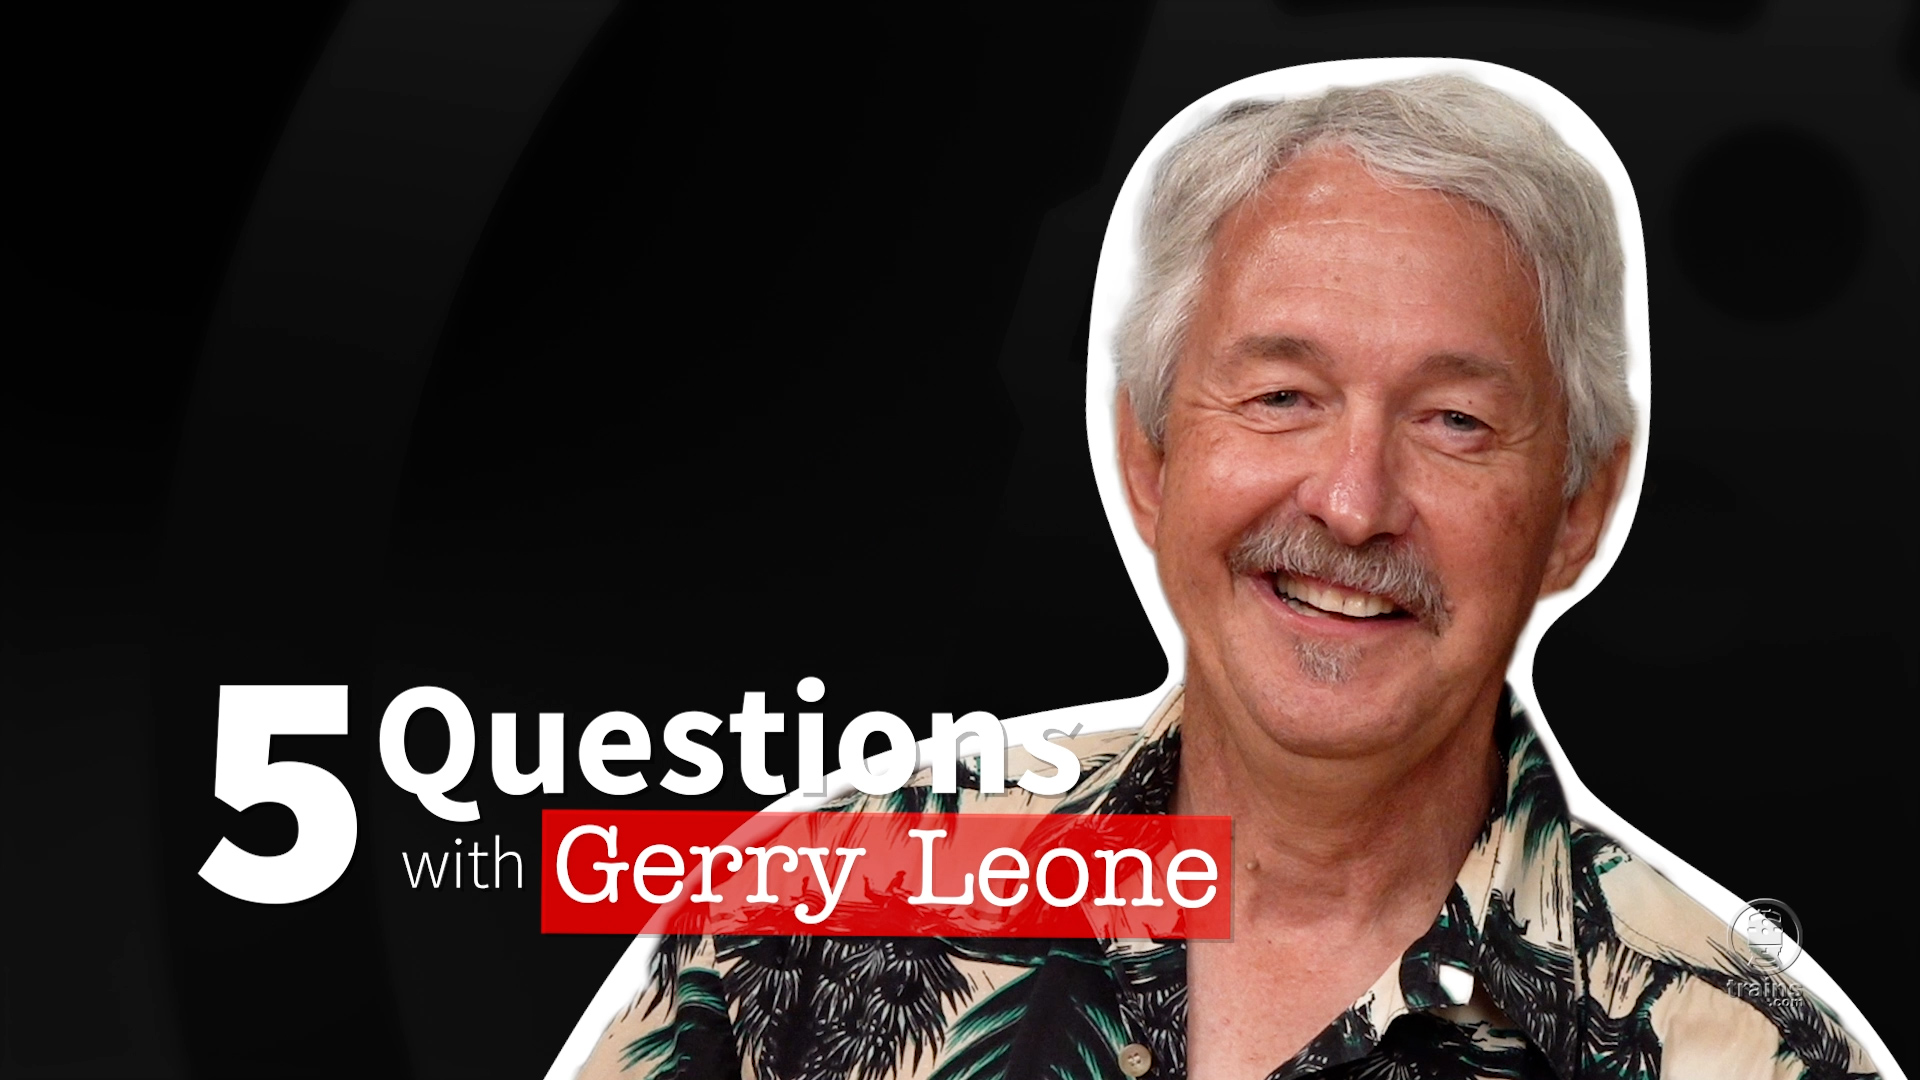 5 Questions with Gerry Leone